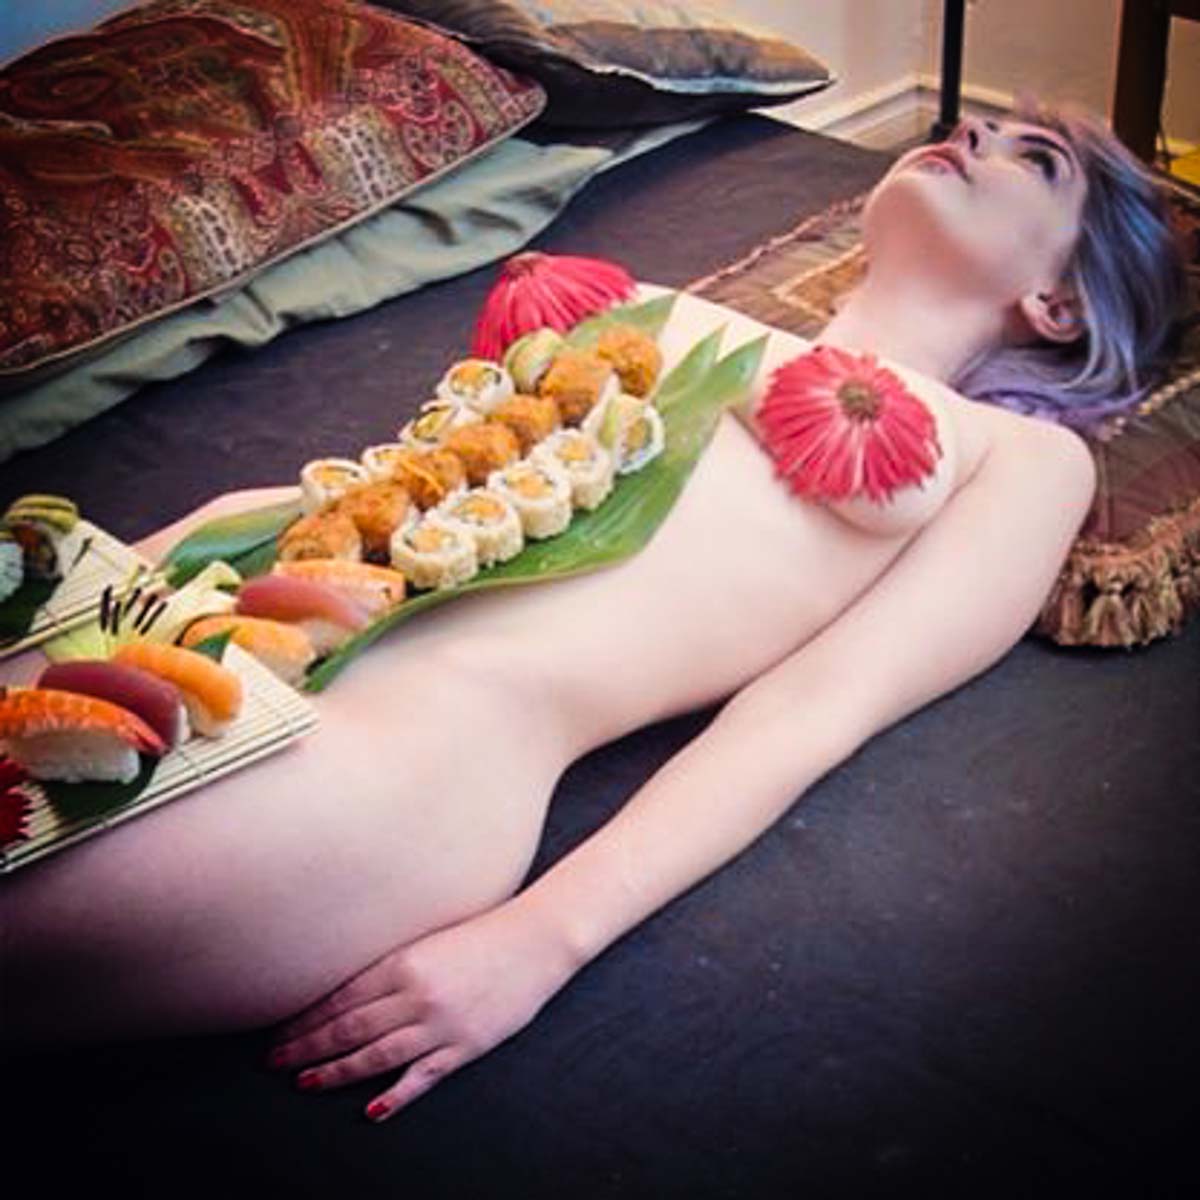 amy hilden recommends naked women with food pic